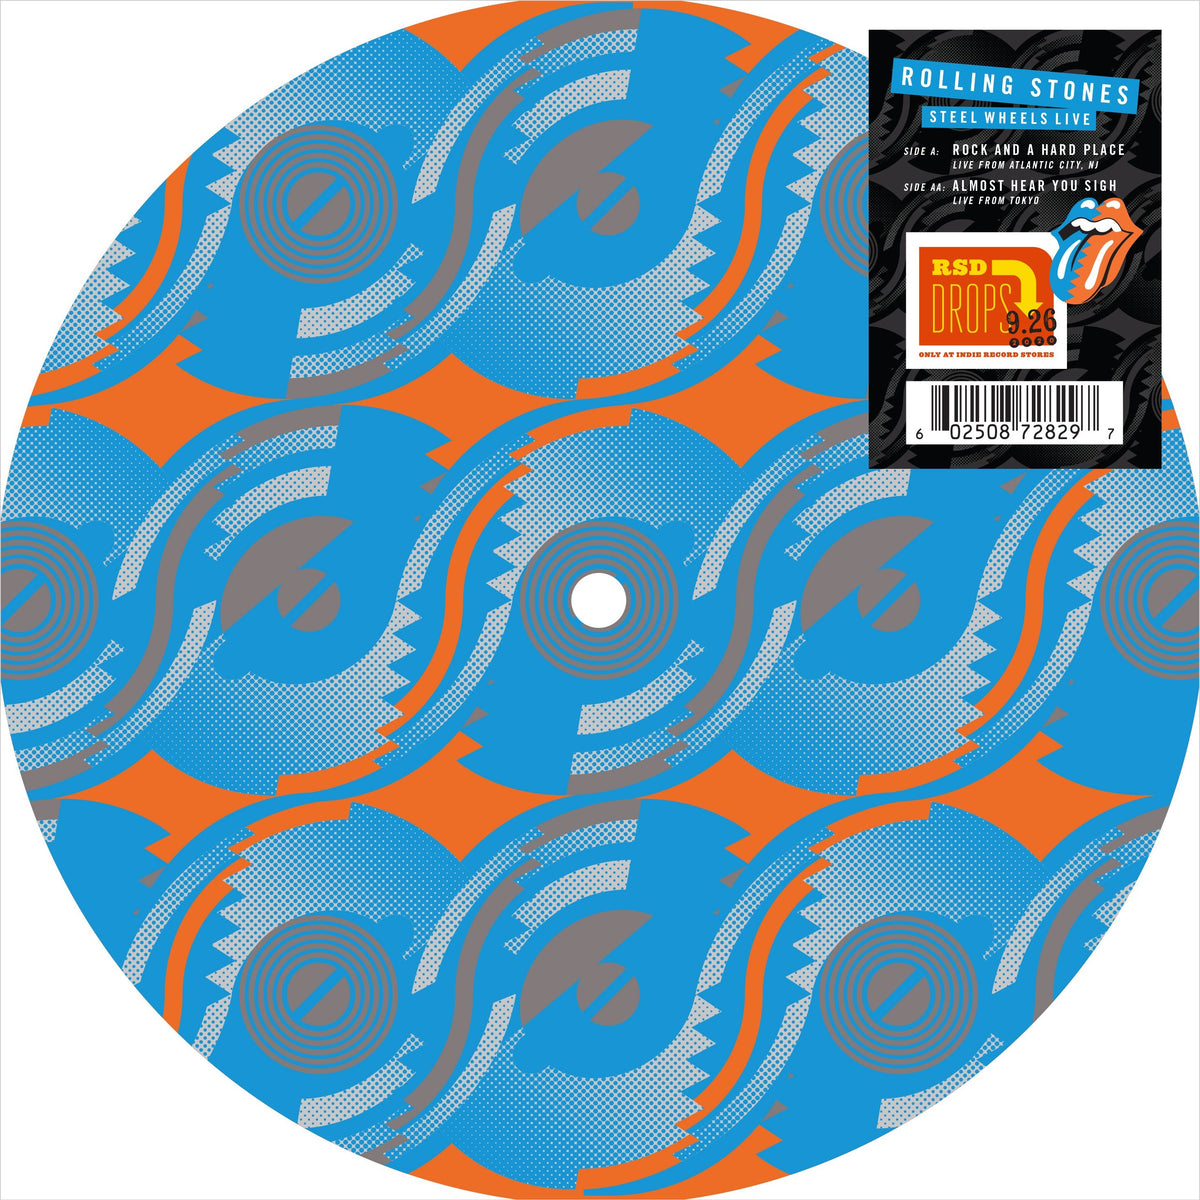 The Rolling Stones - Steel Wheels Live From Atlantic City, 1989: 10" Picture Disc [RSDROP2]